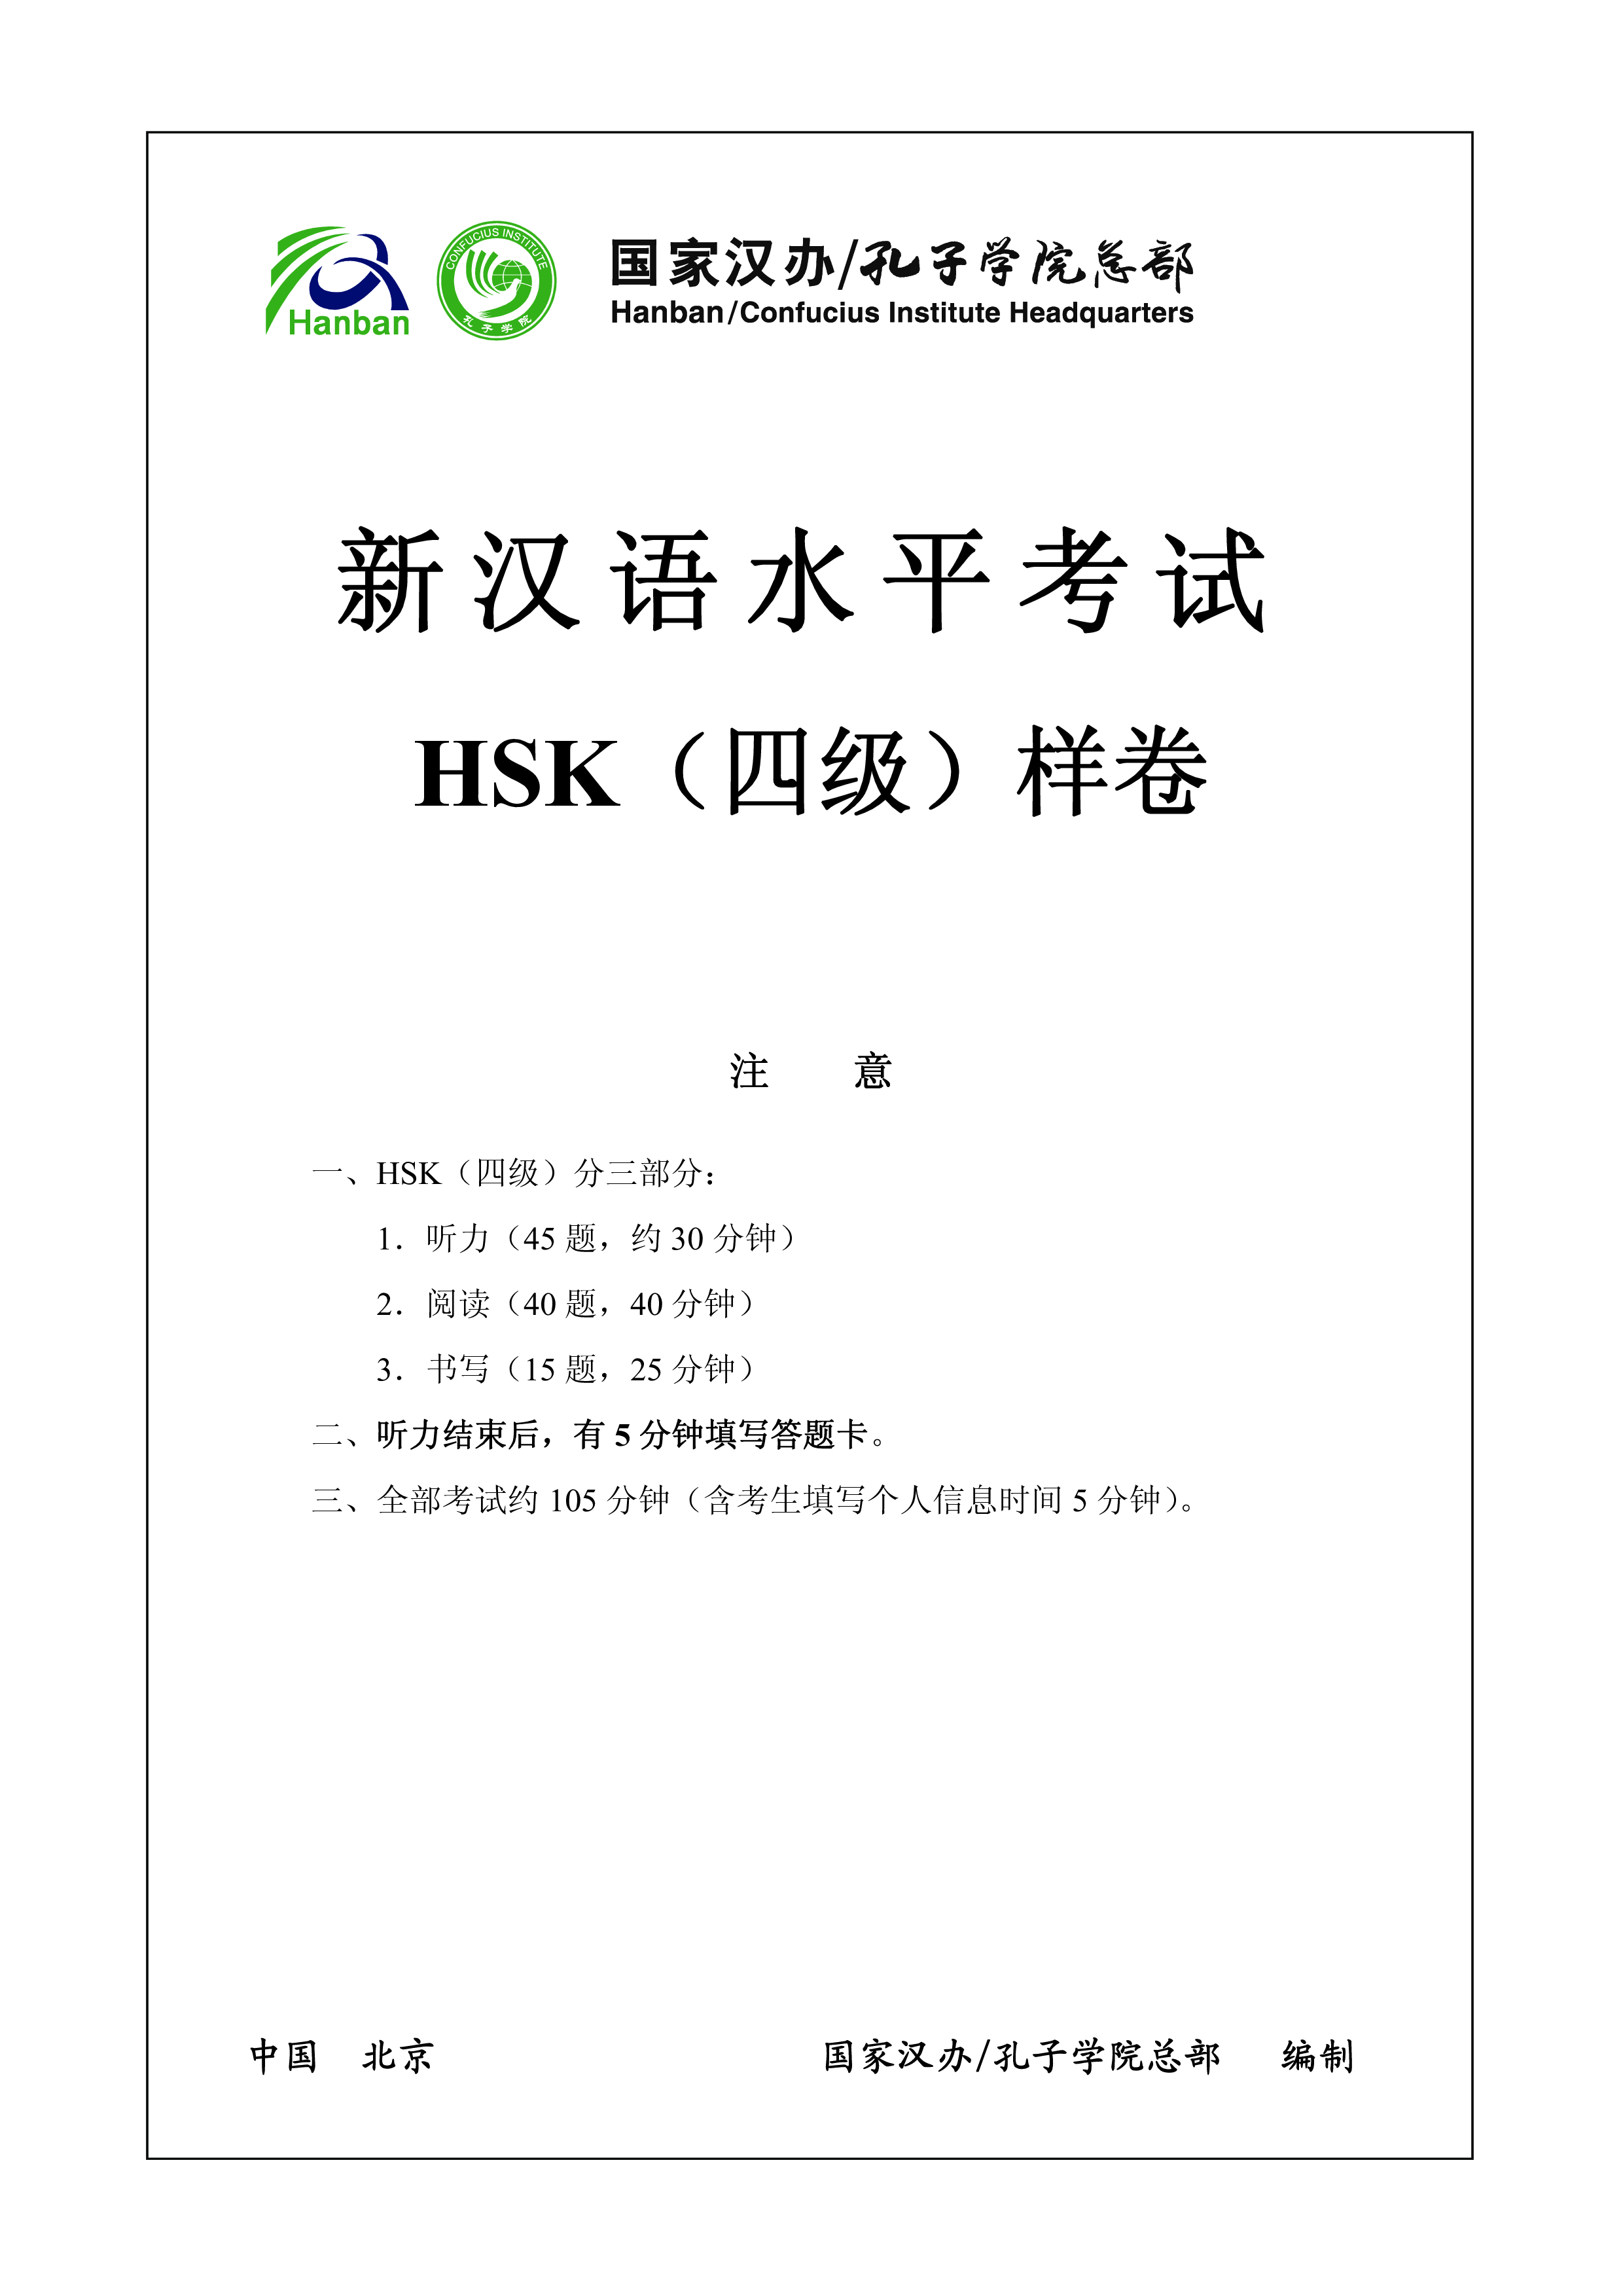 hsk4 chinese words test exam and answers example 2 Hauptschablonenbild